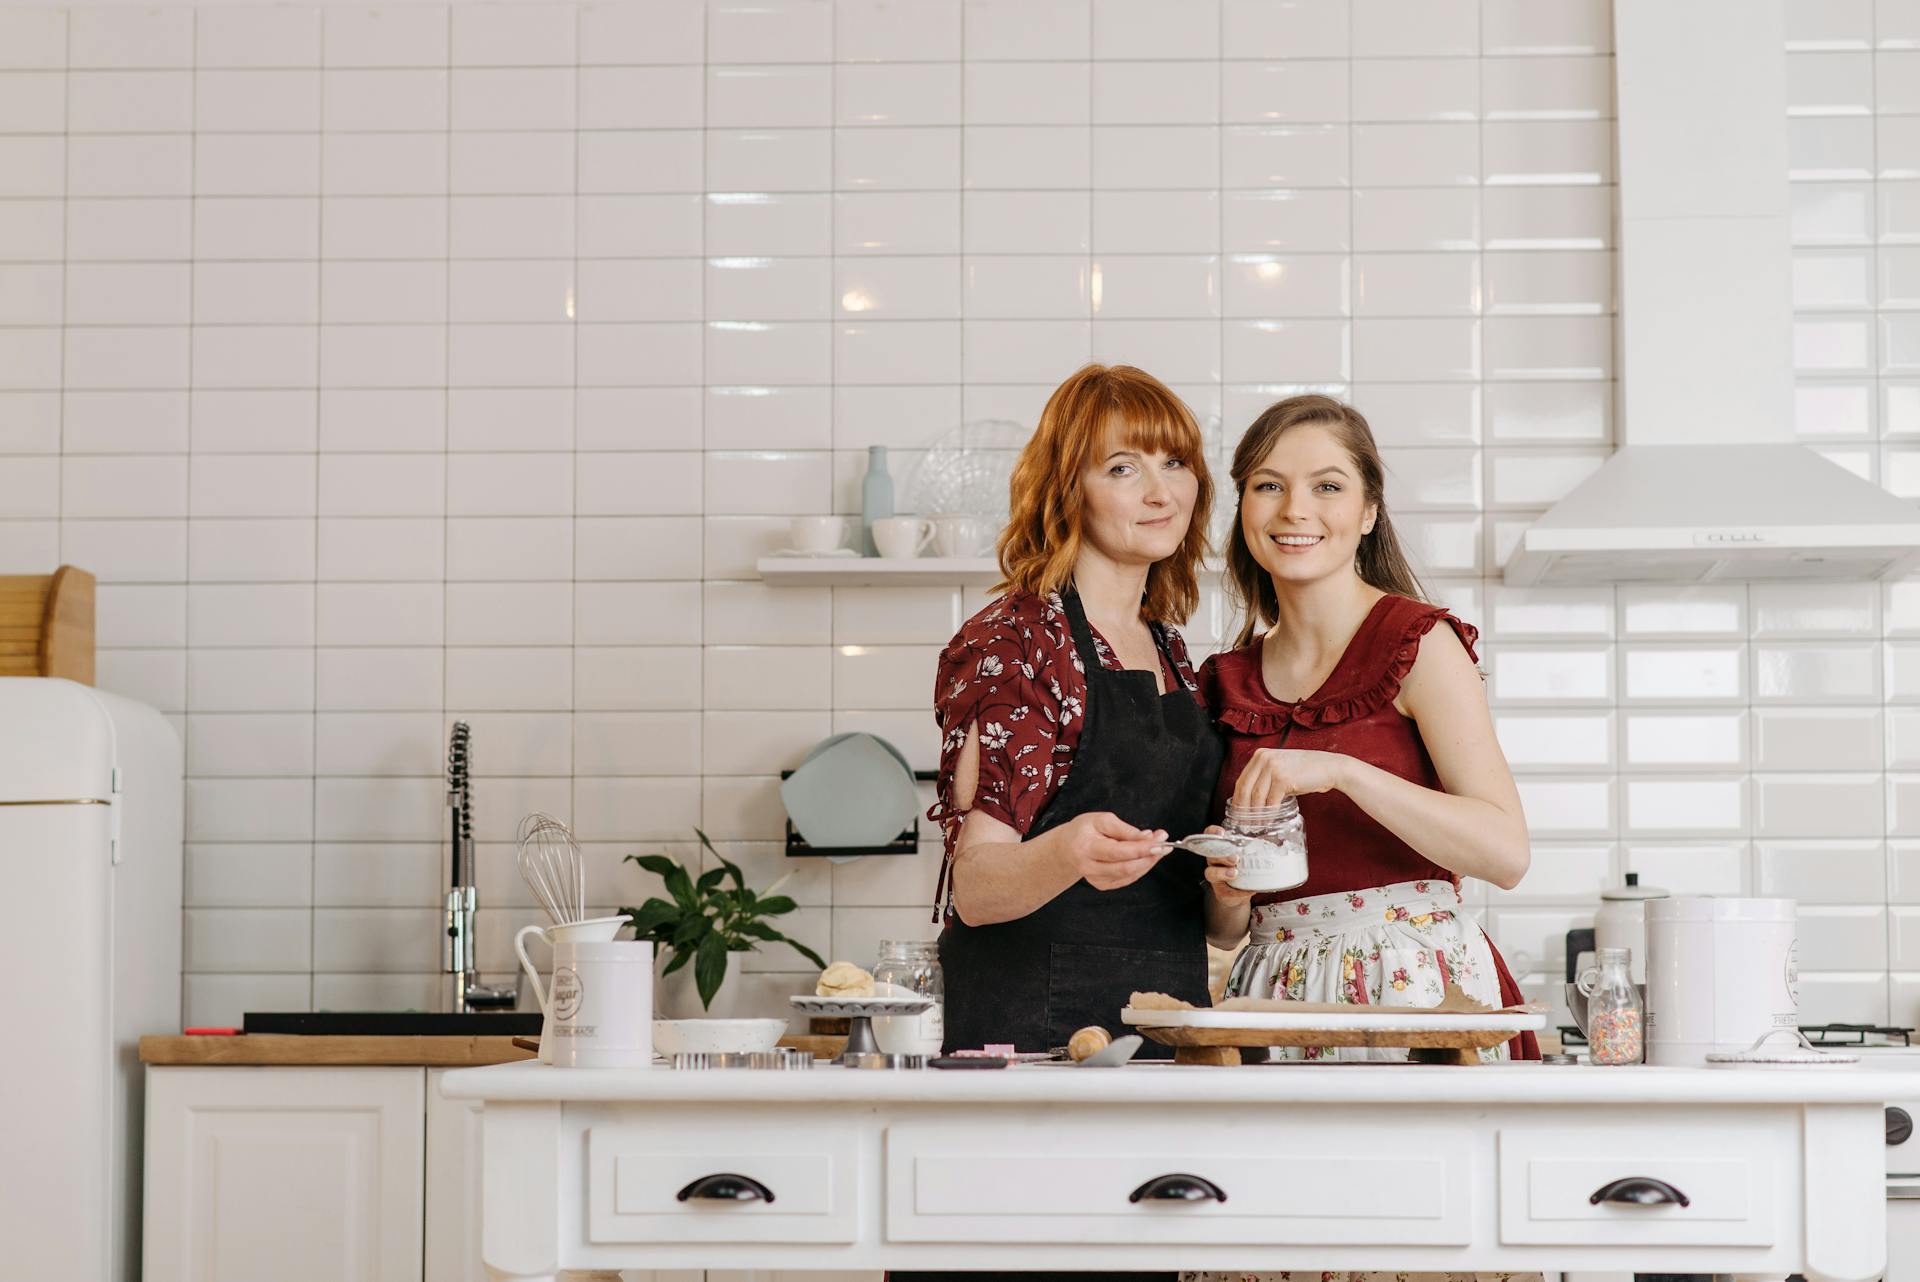 A mother with her daughter in the kitchen | Source: Pexels